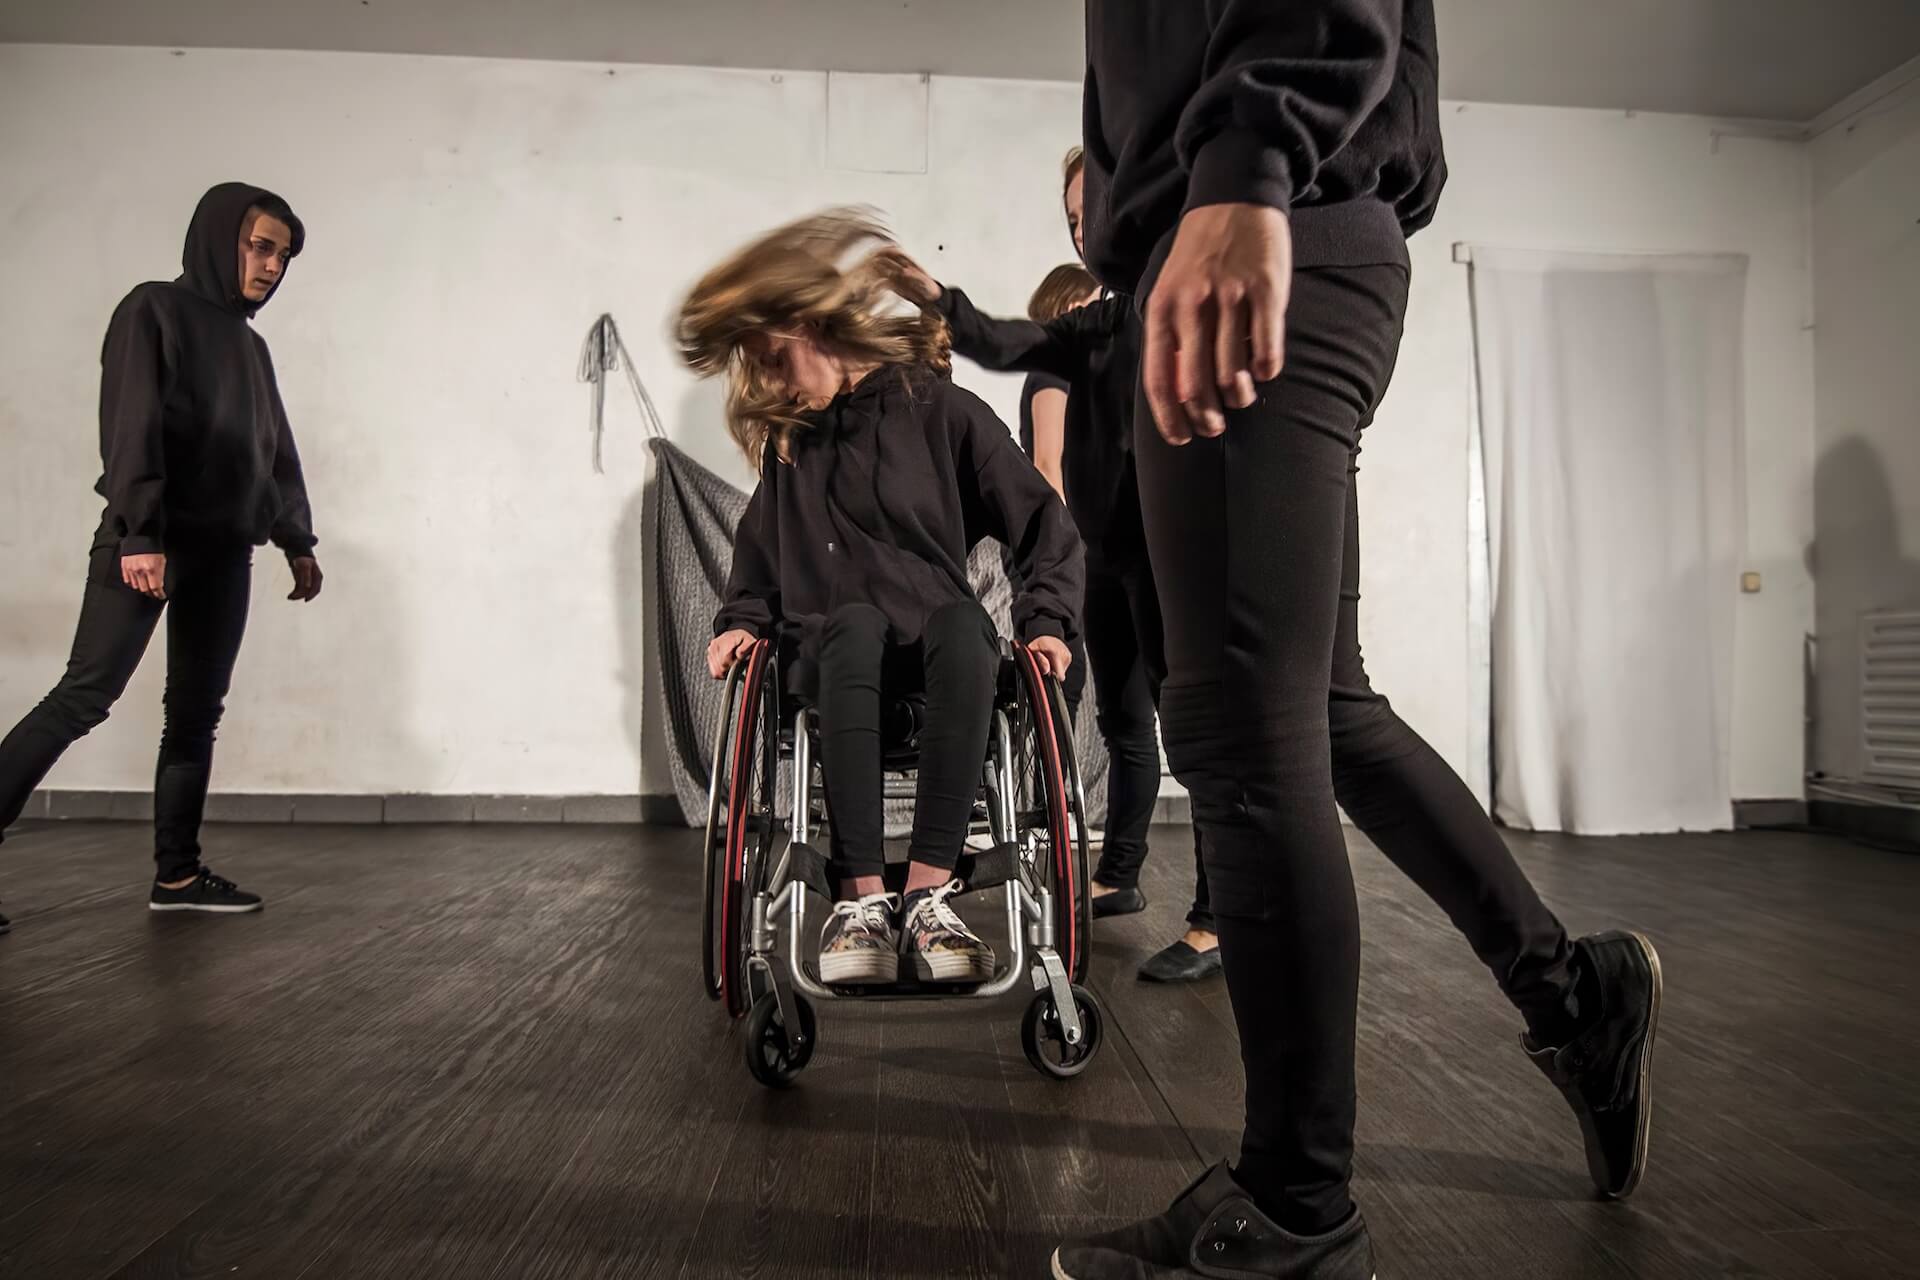 One performer on a wheelchair. Four others are walking around her. The one on the wheelchair is shaking her head vigorously as if she has just been slapped